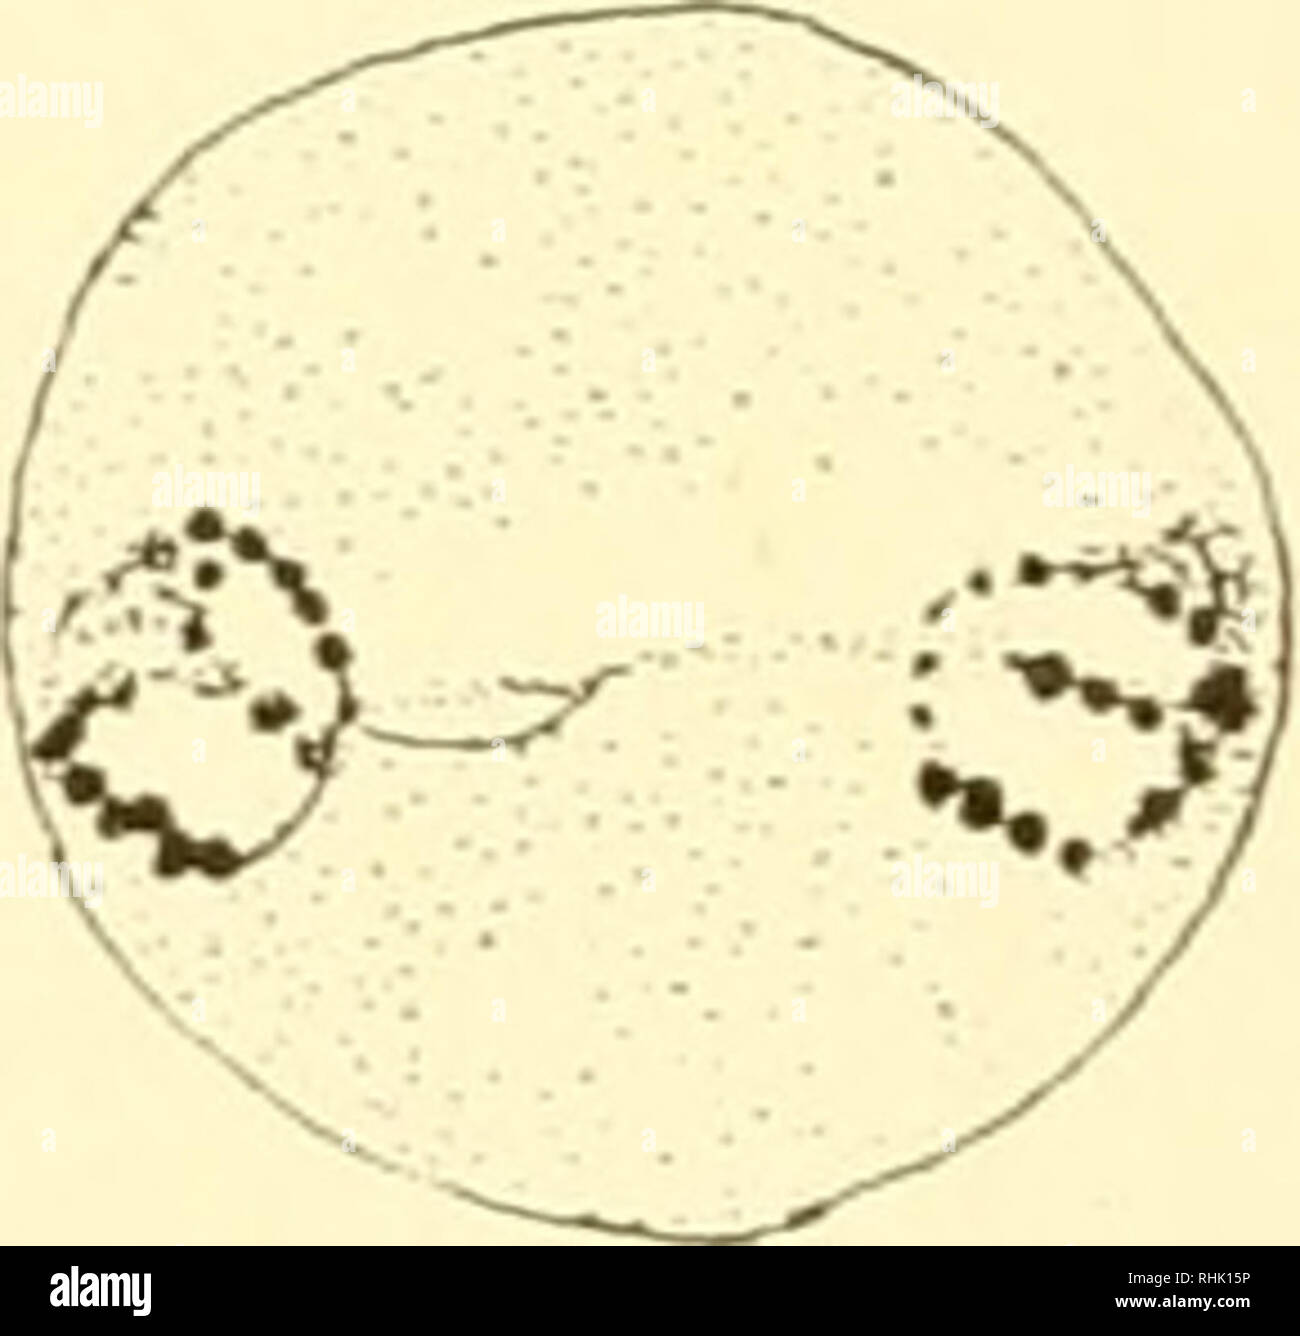 The Biology Of The Protozoa Protozoa Protozoa E Fig 158 Diplocystis Schneideri Zygotic Meiosis A To E Nucleus Of The Zygote Forming 6 Chromosomes The Diploid Number And The First Metagamic Division